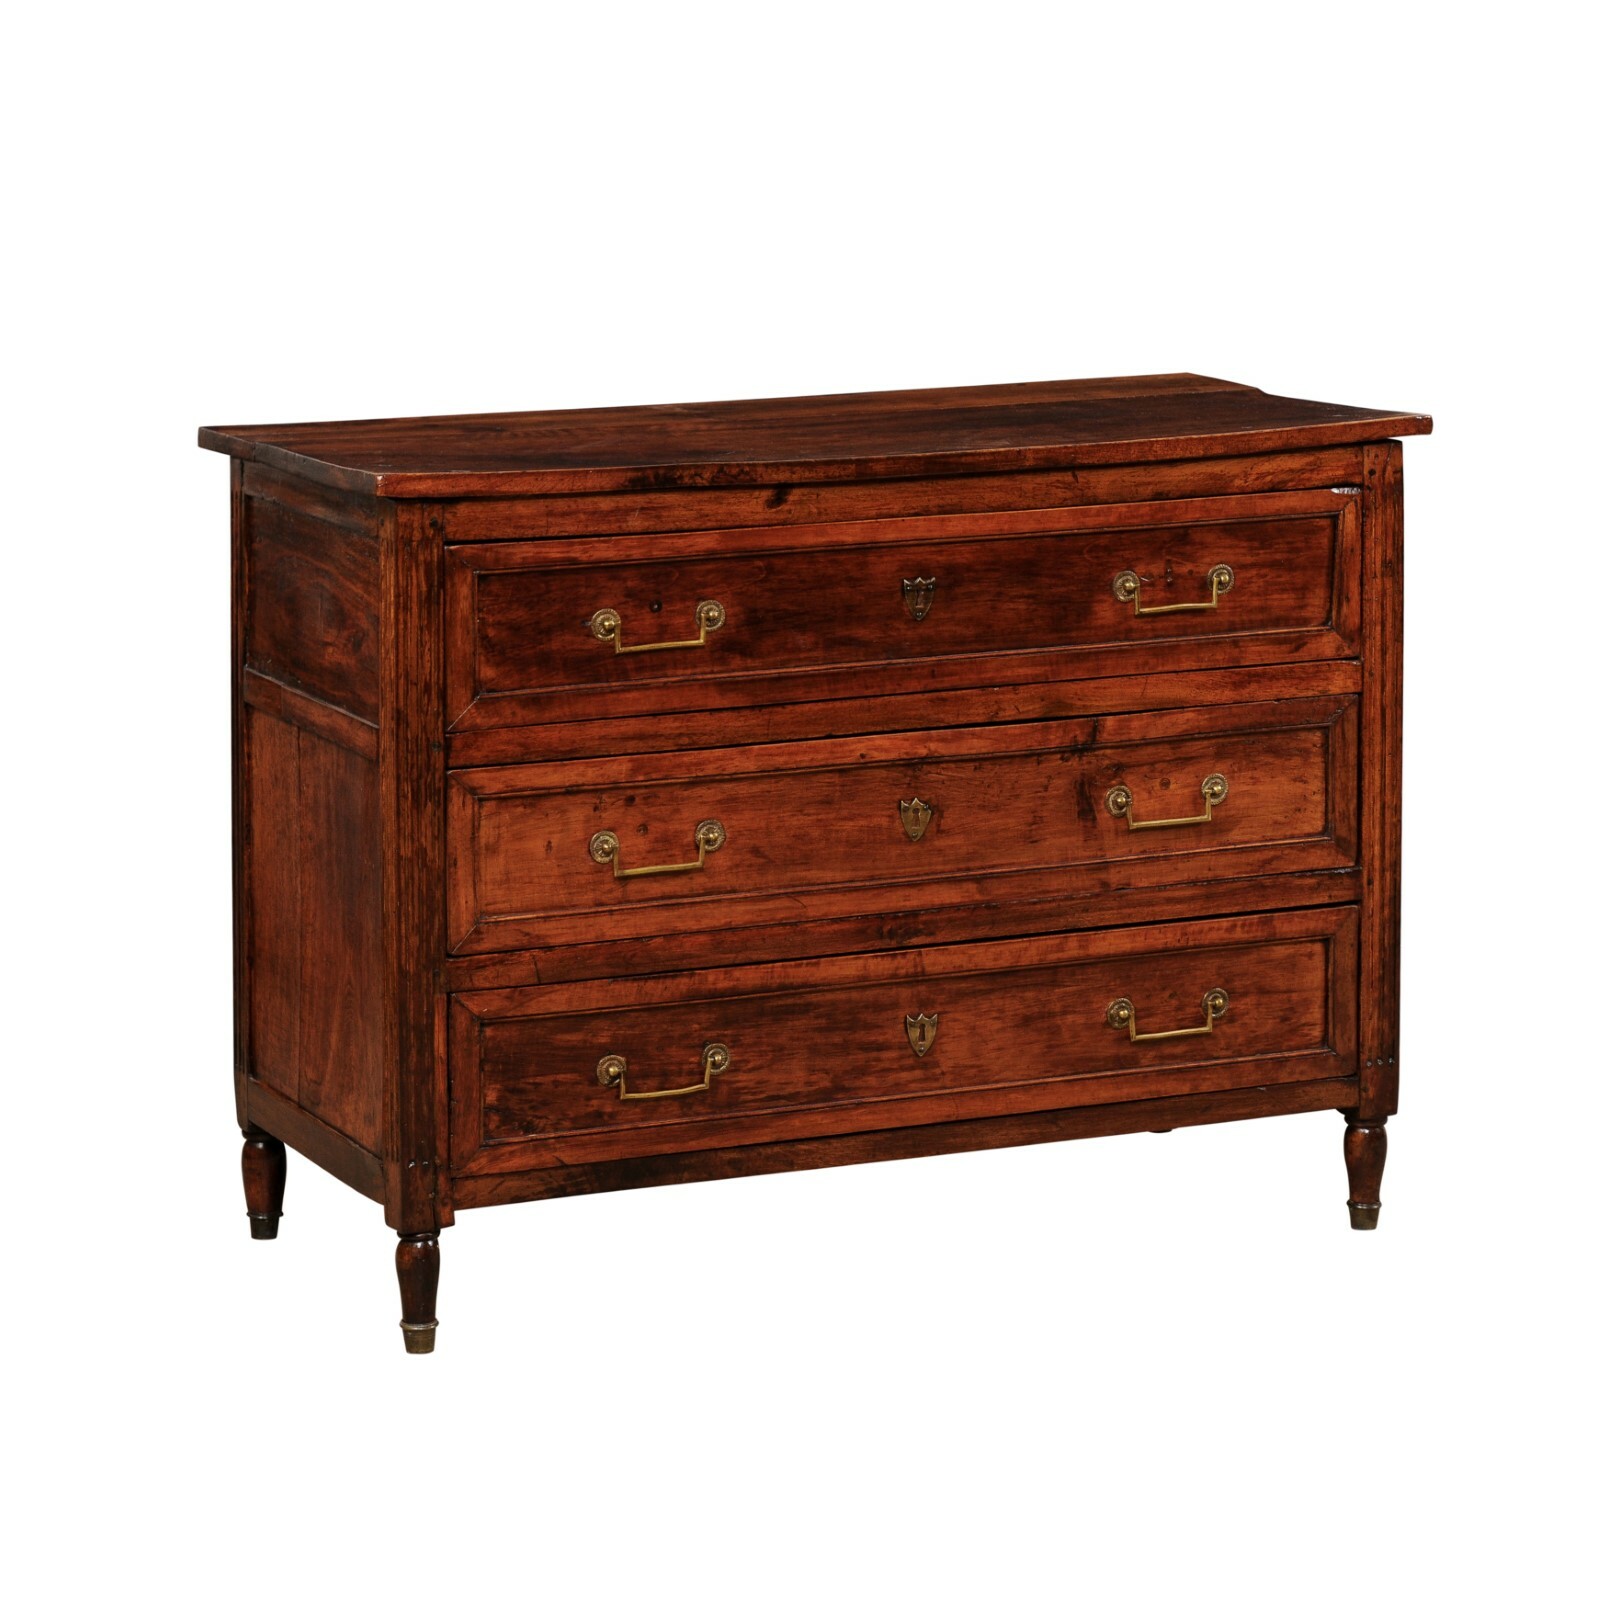 Early 19th C. French 3 Drawer Commode